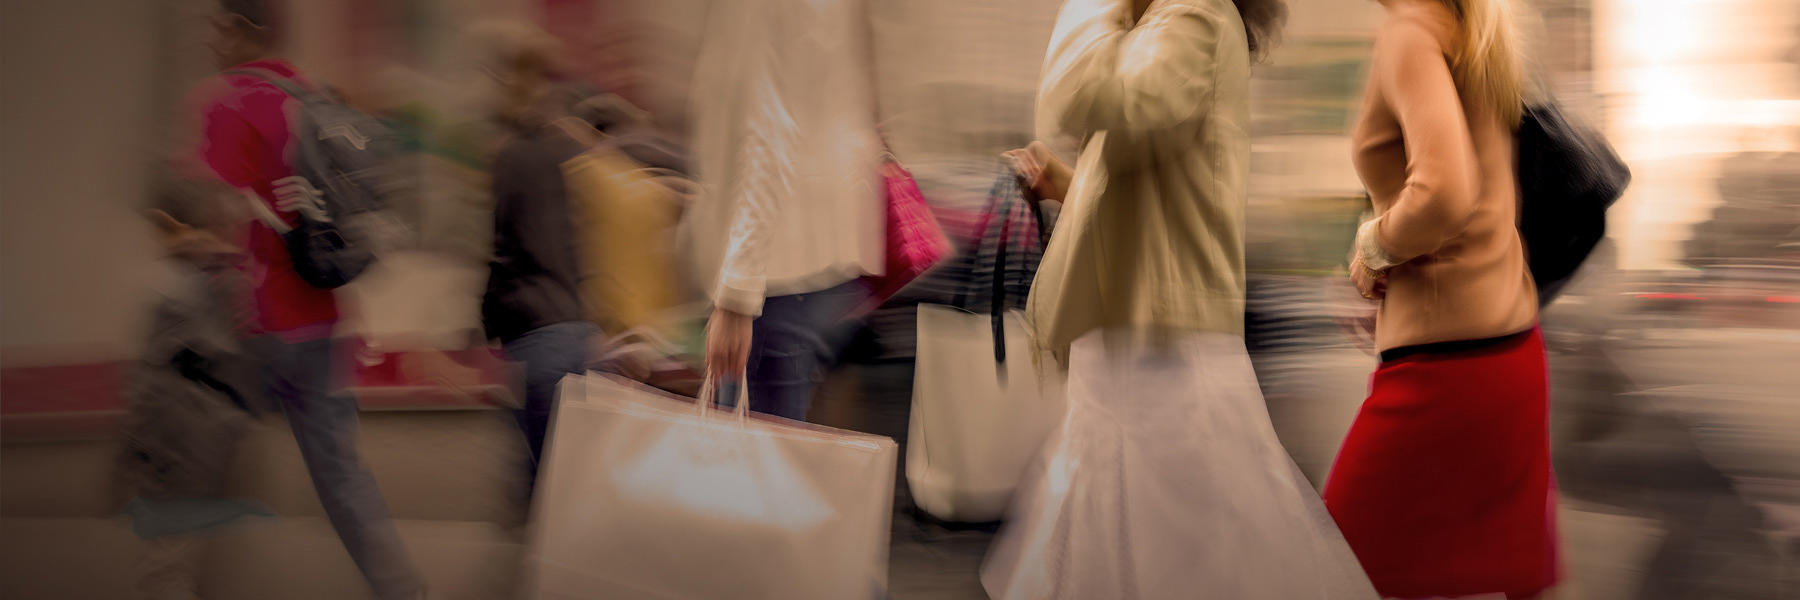 How a mobile-first approach changed the way shoppers interact with Target | Thoughtworks